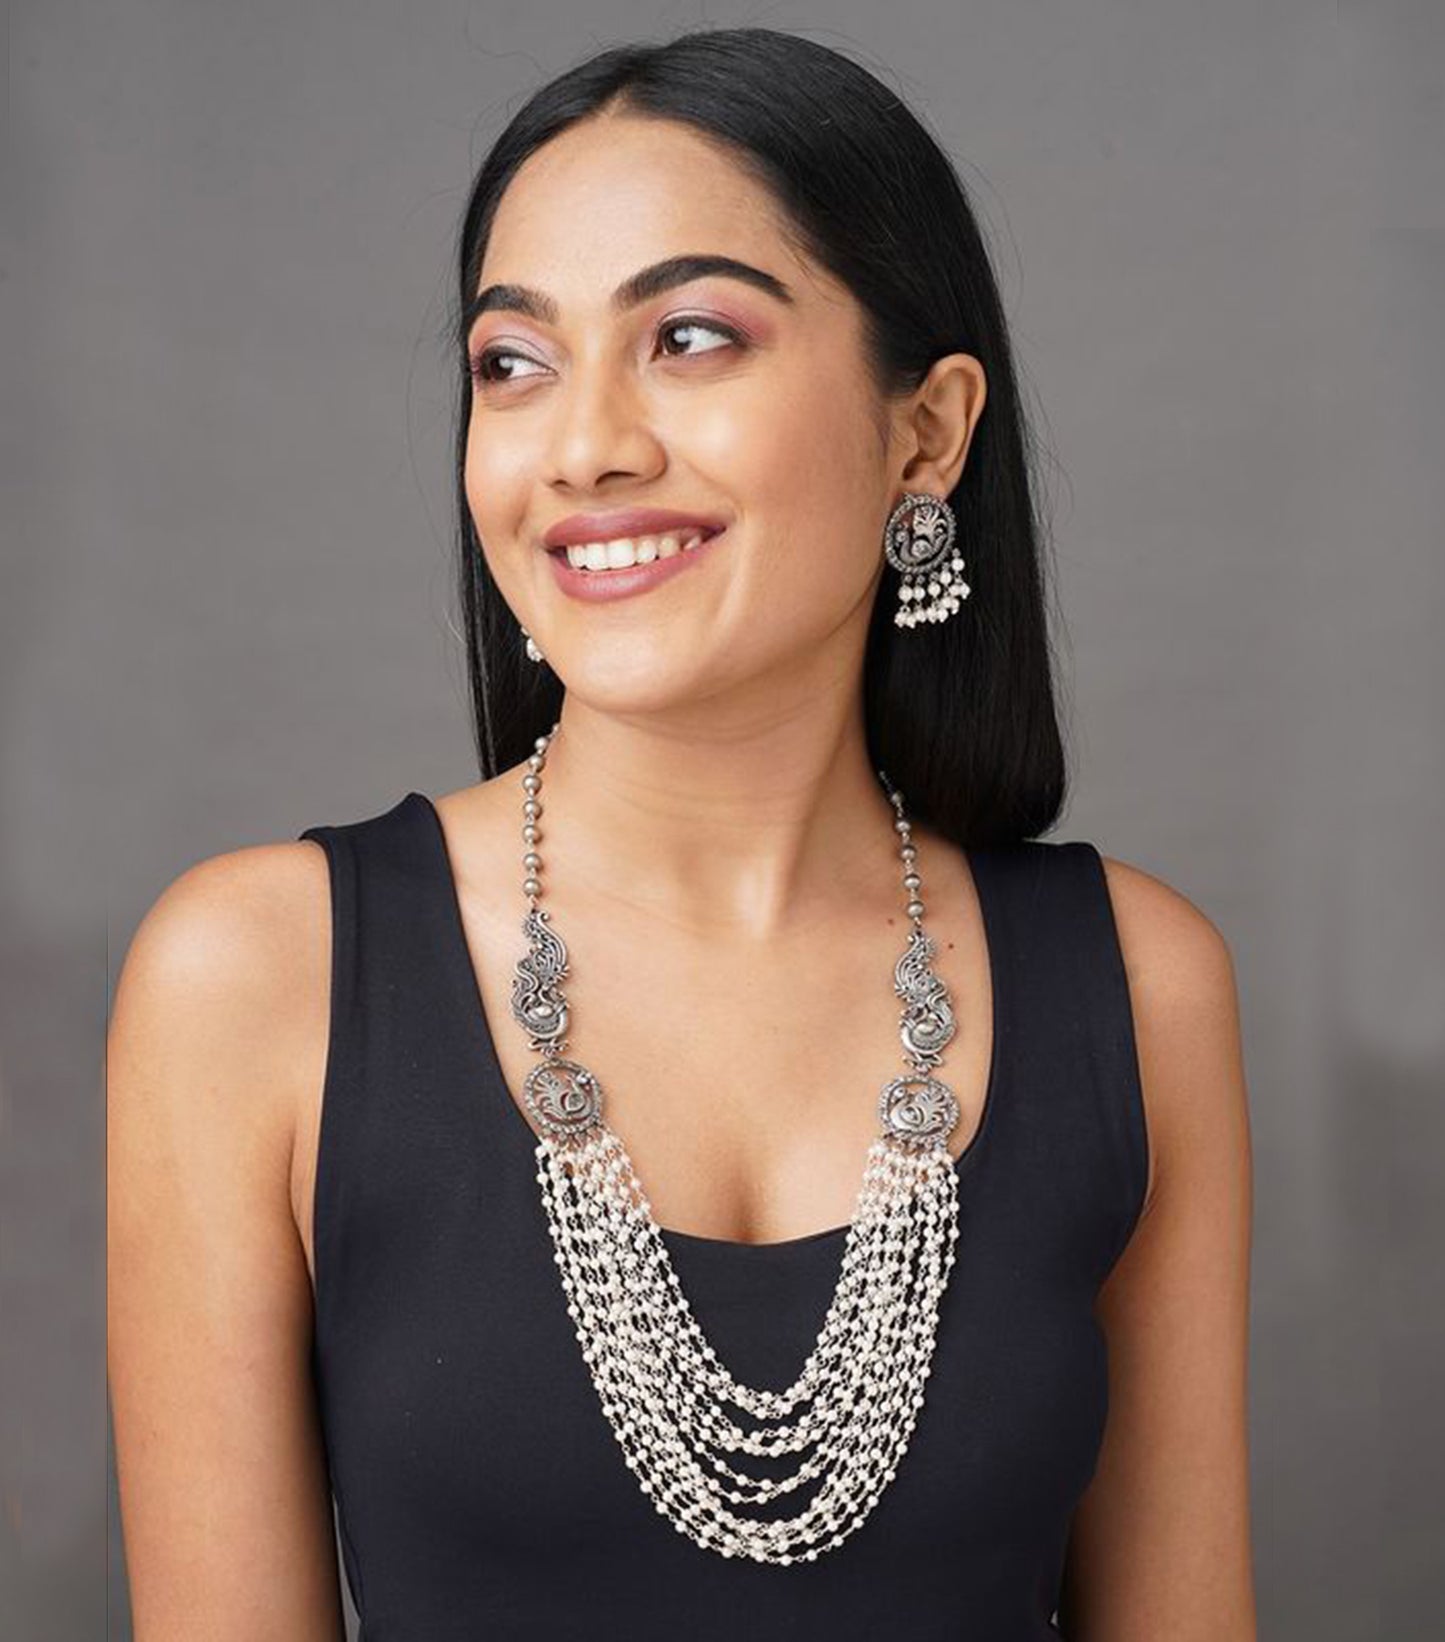 Indian Oxidized Silver Necklace with Multi-Layered Pearl Strands - Designer Oxidized Jewelry for Special Occasions